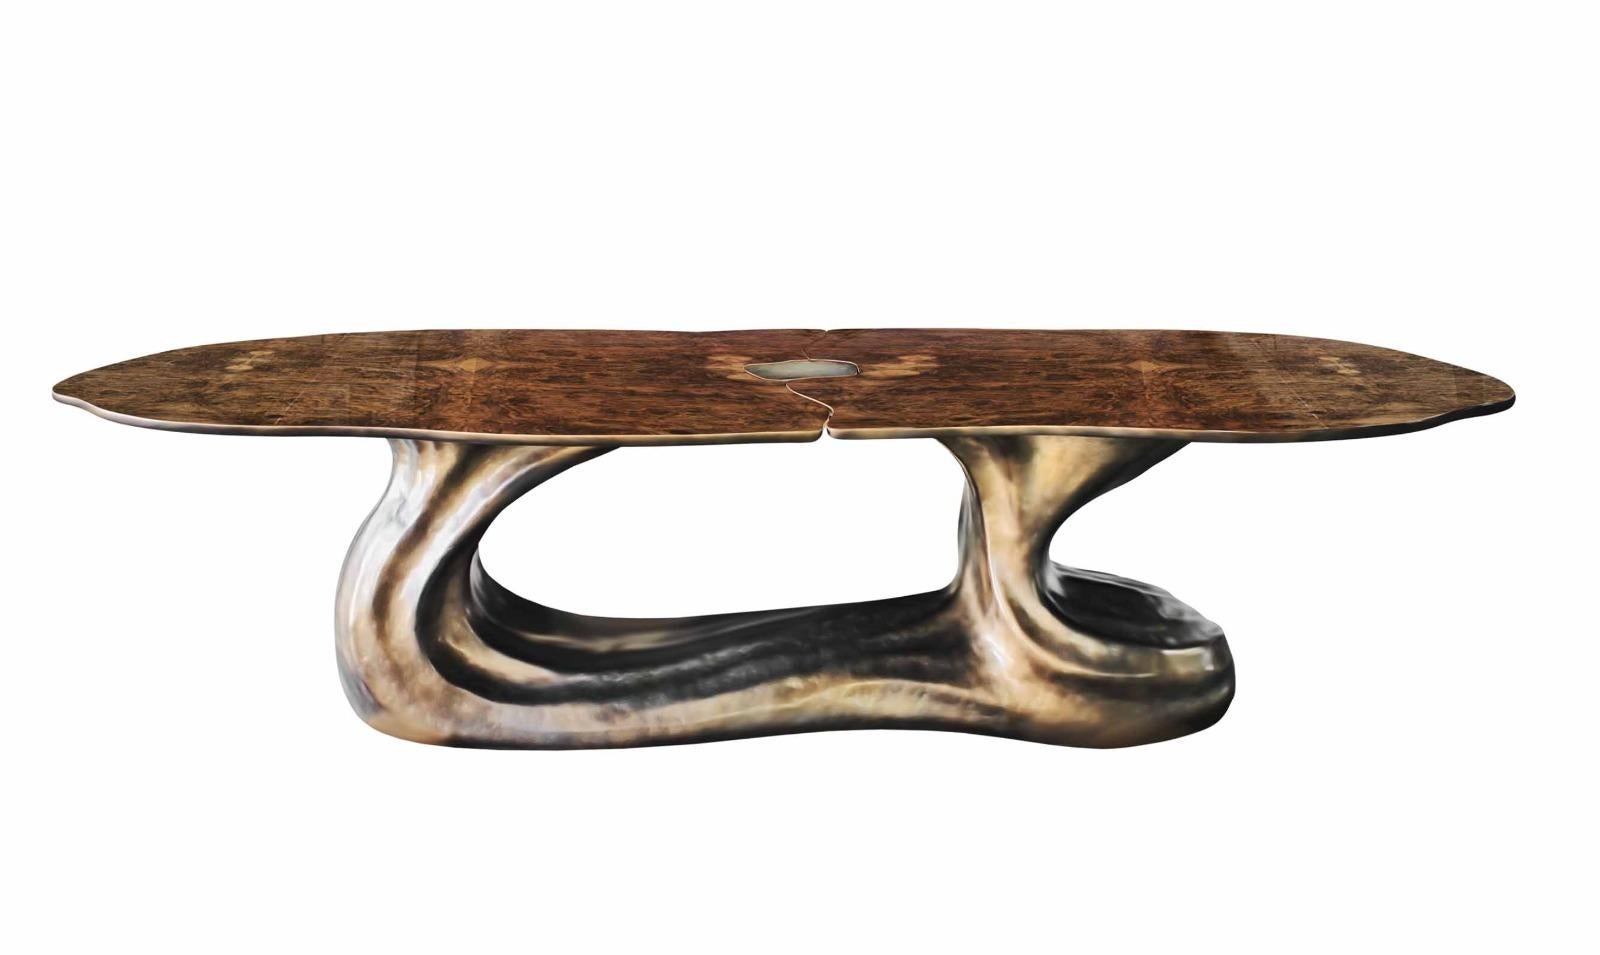 Oval dining table.

General information.

Dimensions (cm): 330 x 130 x 75
Dimensions (in): 129.9 x 51.2 x 29.5
Weight (kg): 170
Weight (lbs): 374.8
Seats: 10 to 12

Materials and colors

Top: Walnut root veneer with high gloss finish;
Base: Resin